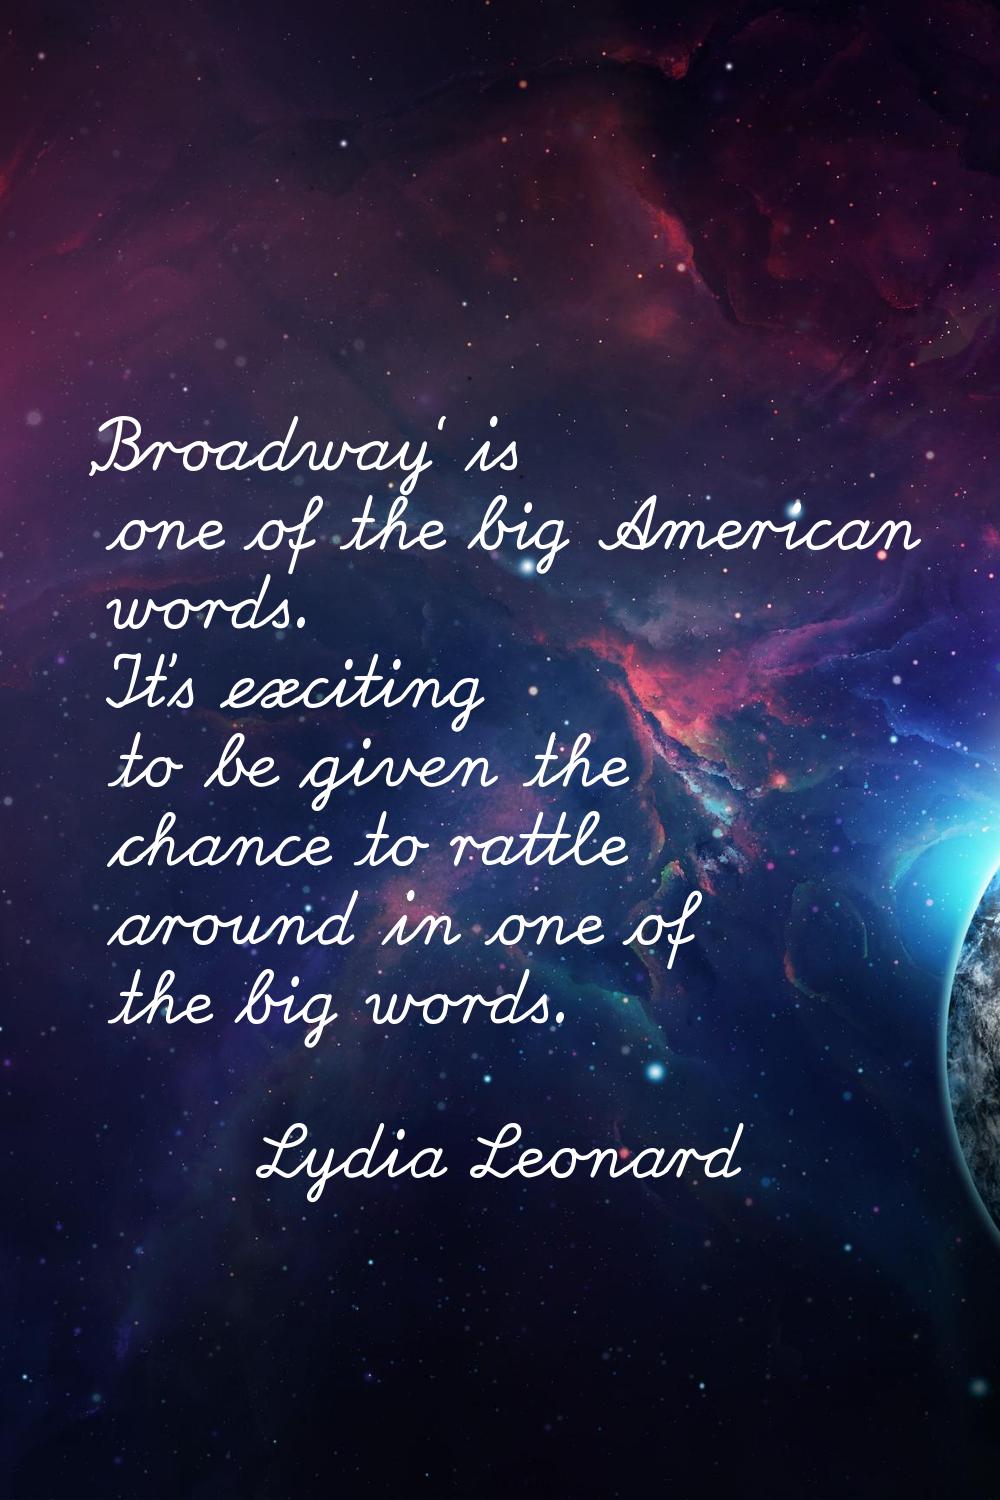 'Broadway' is one of the big American words. It's exciting to be given the chance to rattle around 